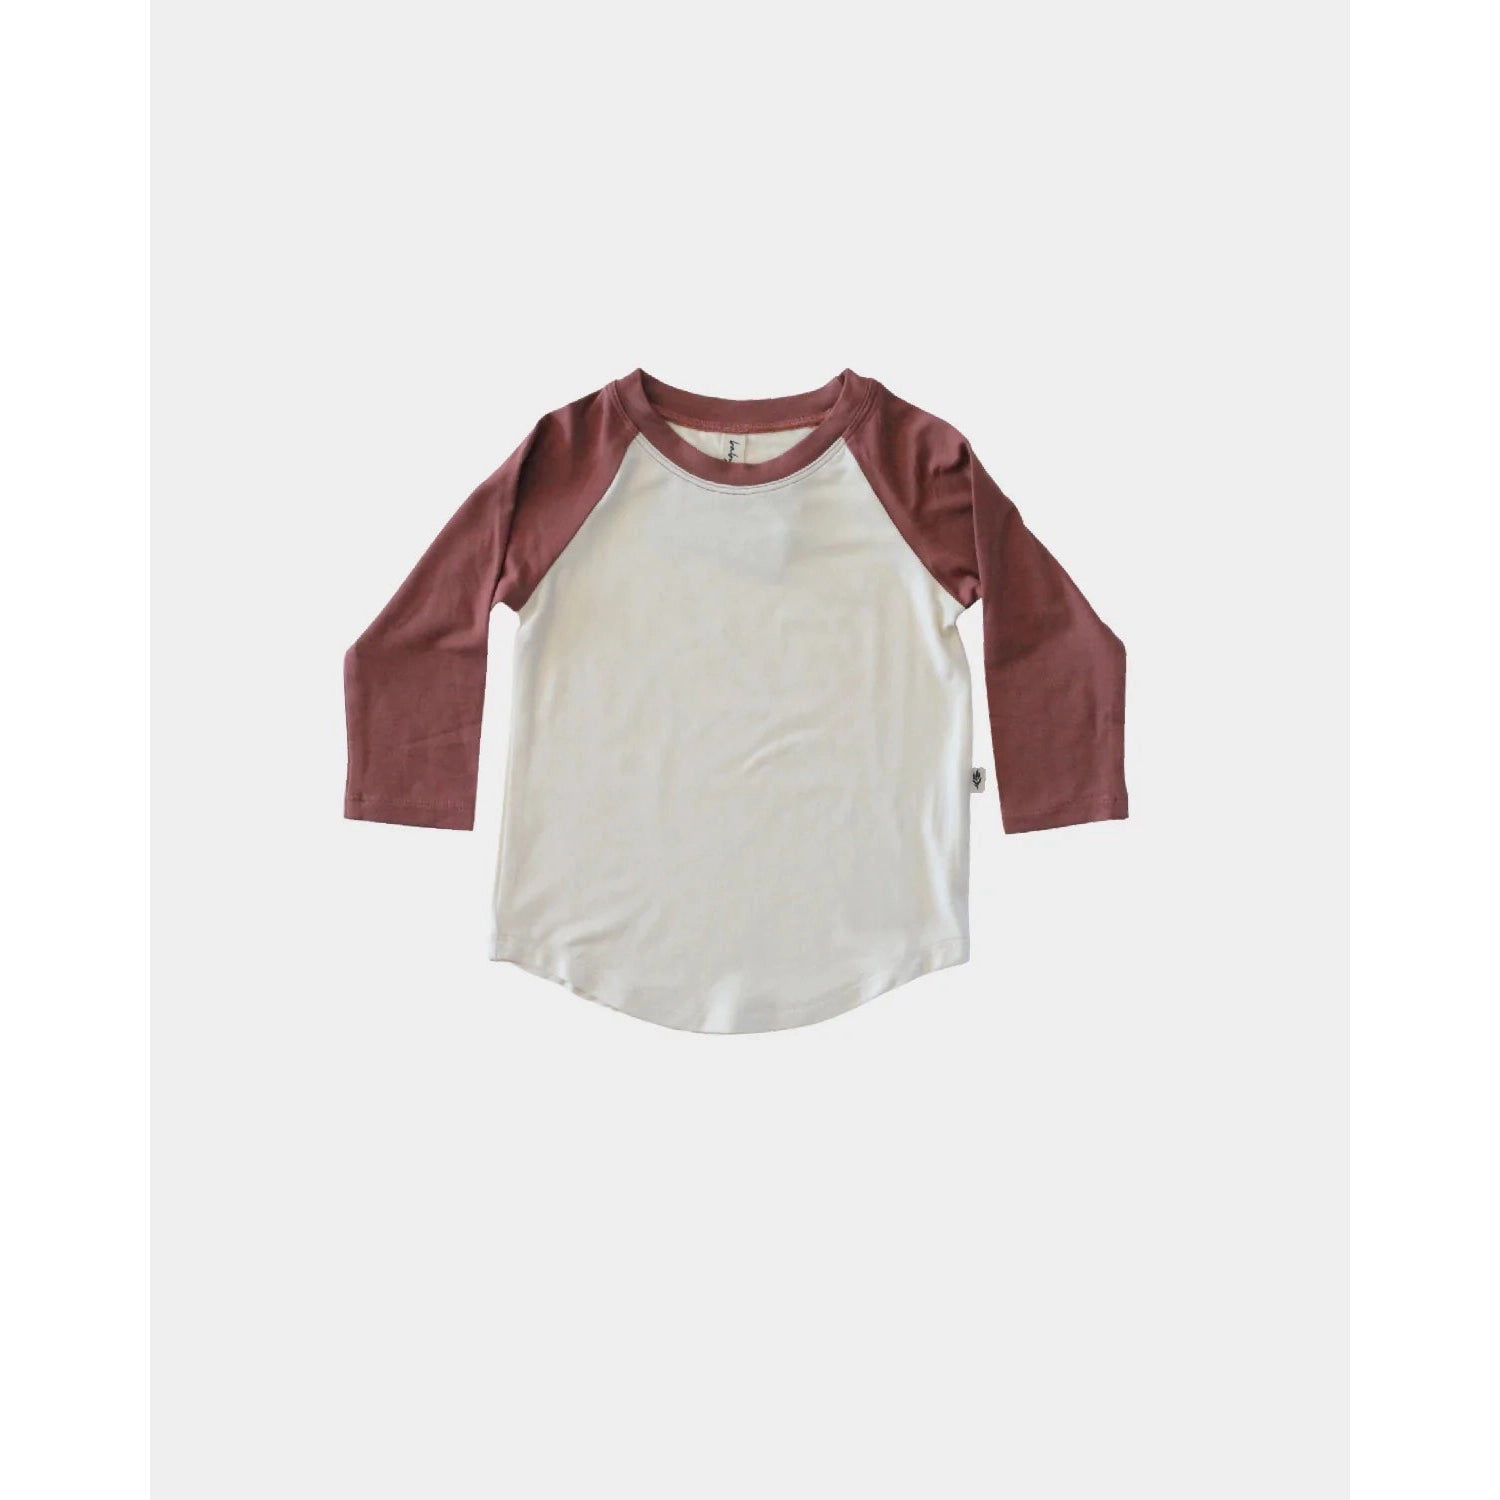 Baby Sprouts Baseball Tee - Rosewood-Baby Sprouts-Little Giant Kidz